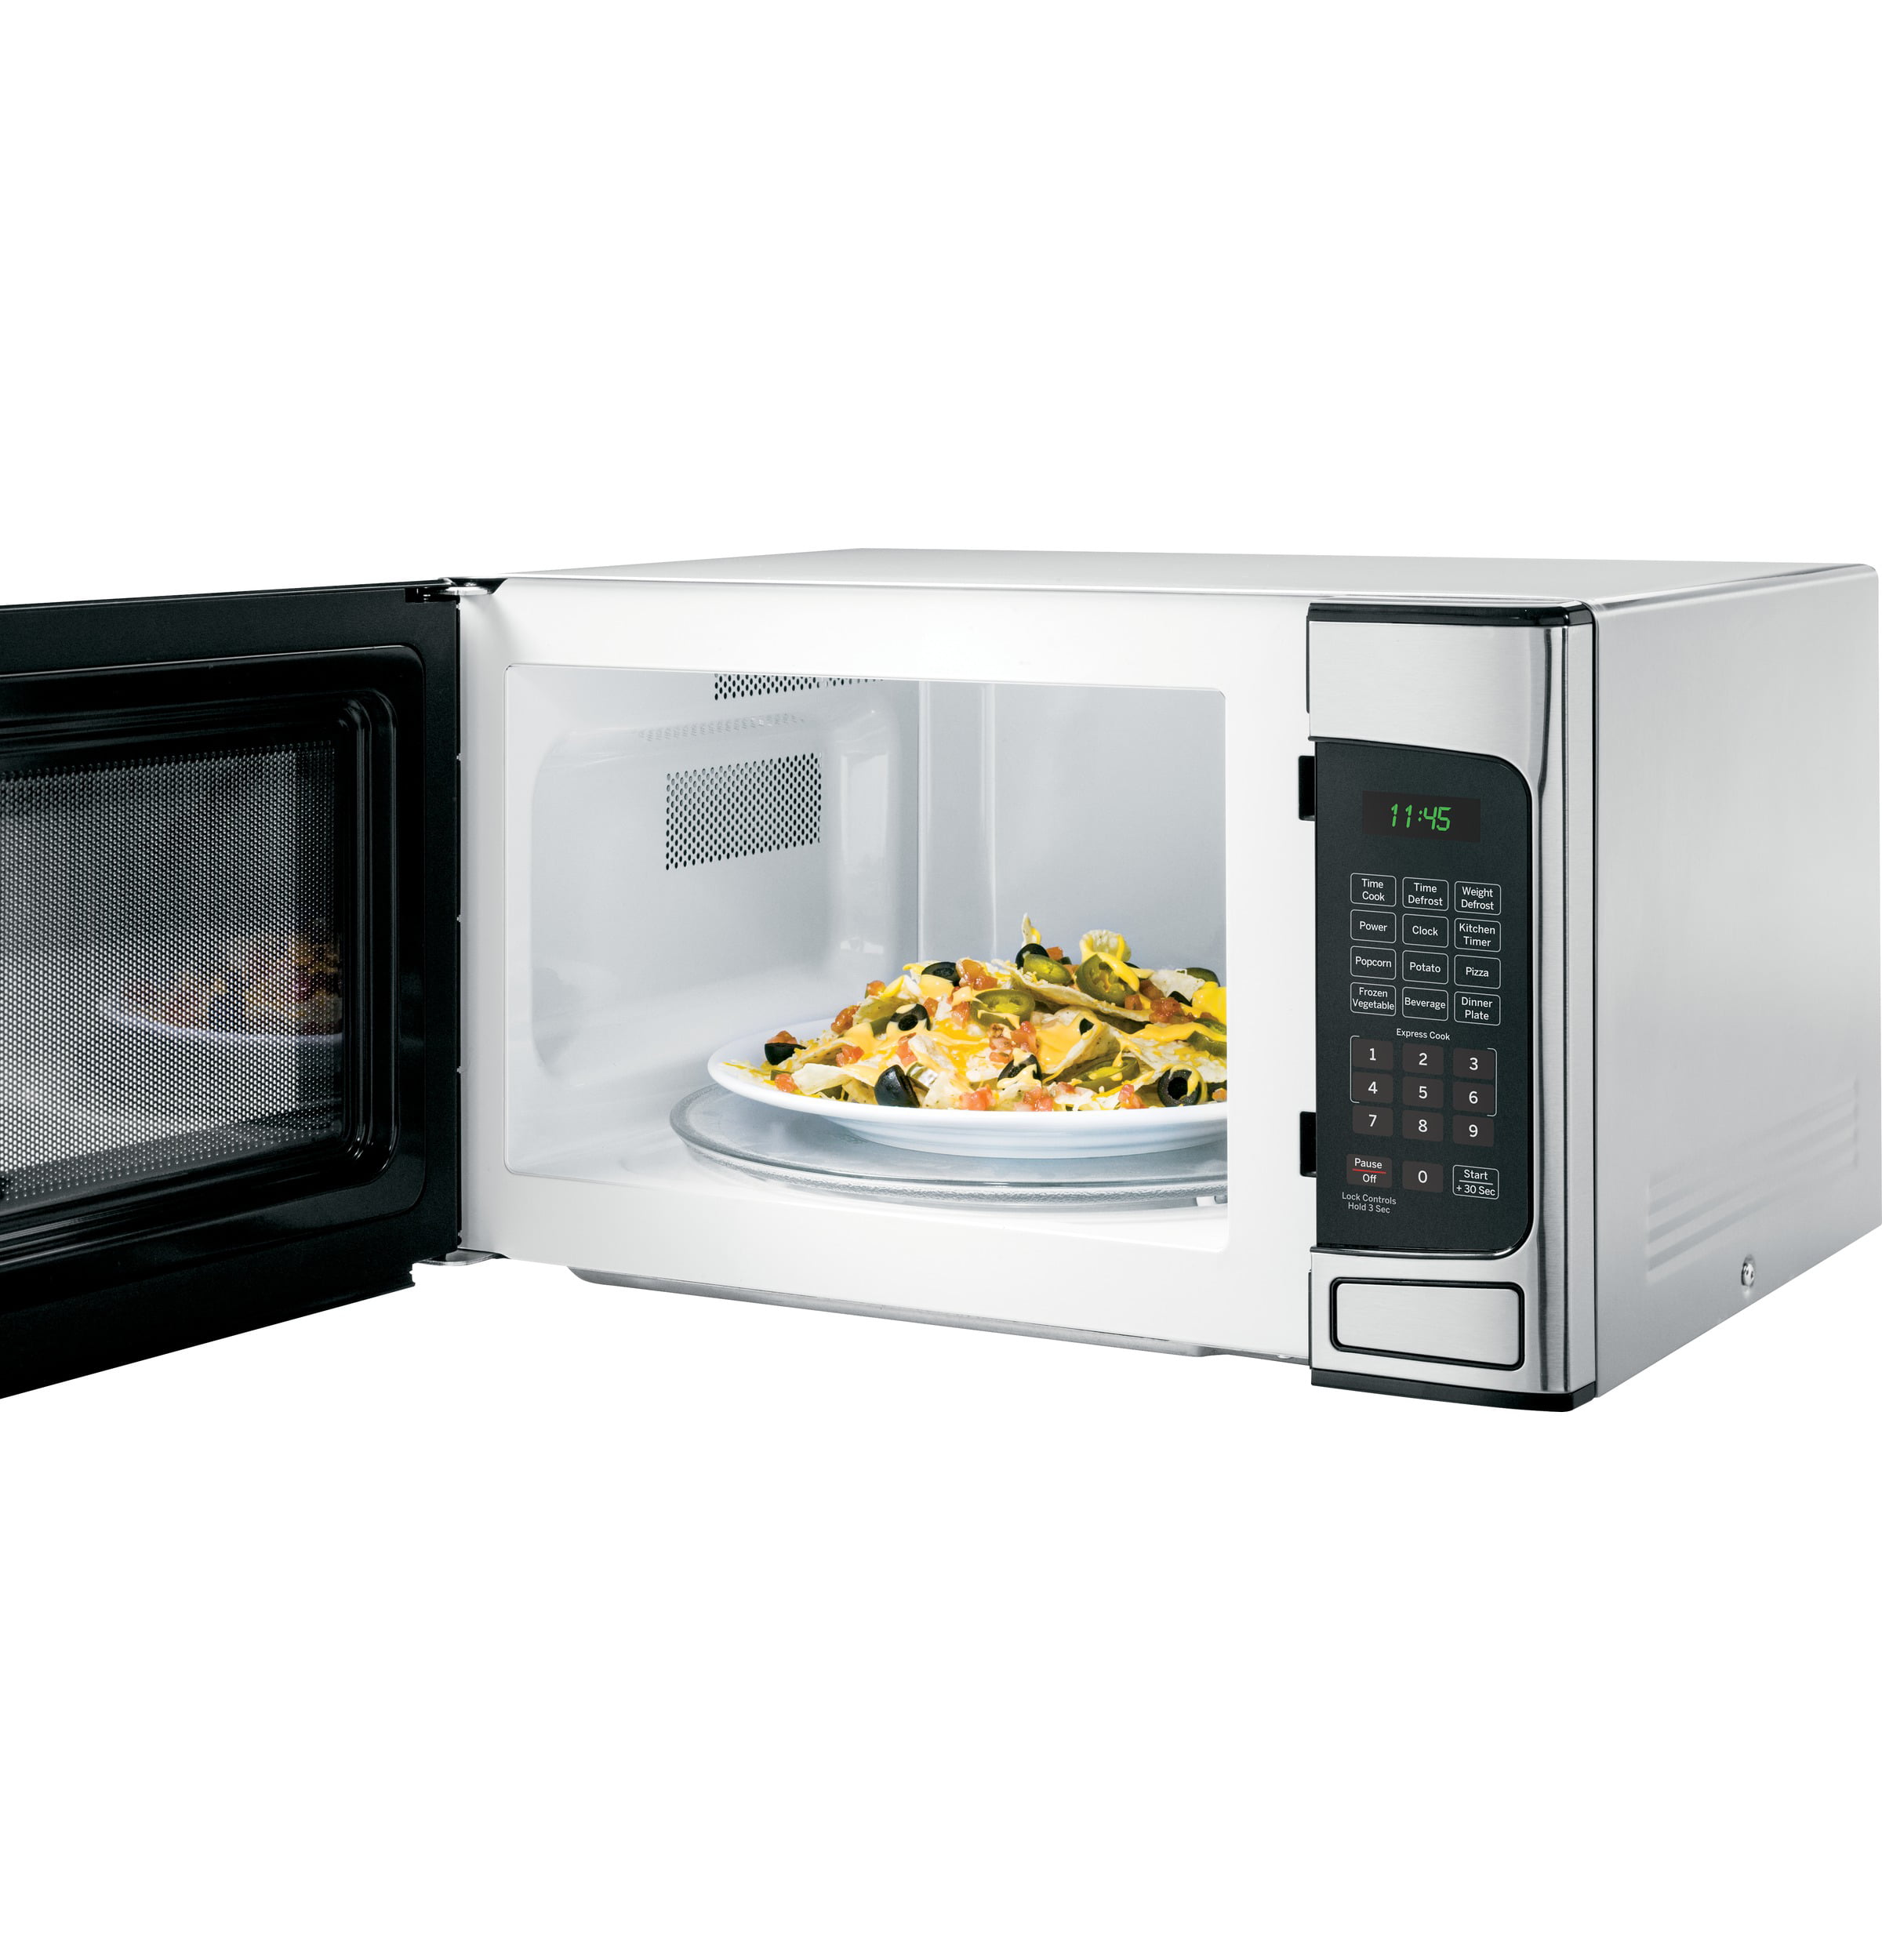 GENERAL ELECTRIC 1.1 Cu. Ft. Countertop Stainless Steel Microwave Oven